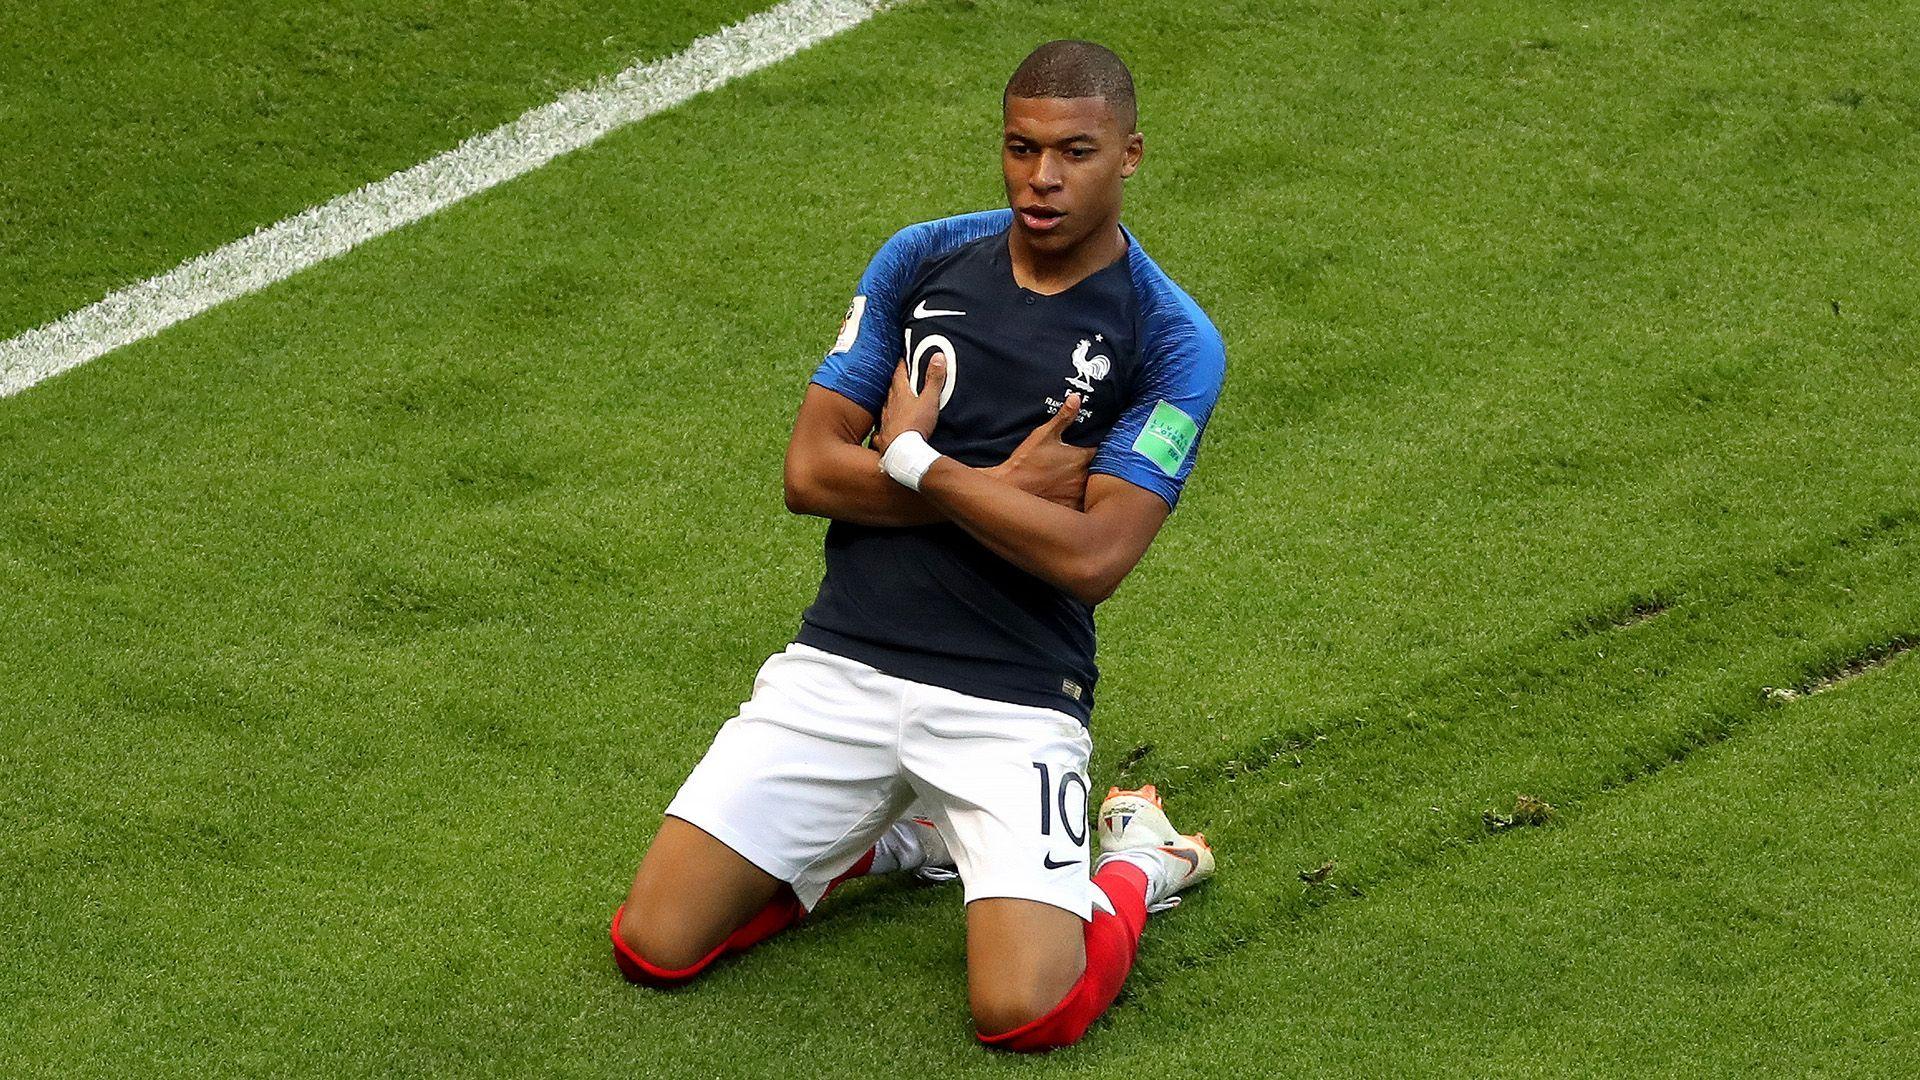 Kylian Mbappé 2019 France Wallpapers and Backgrounds Image – YL Computing